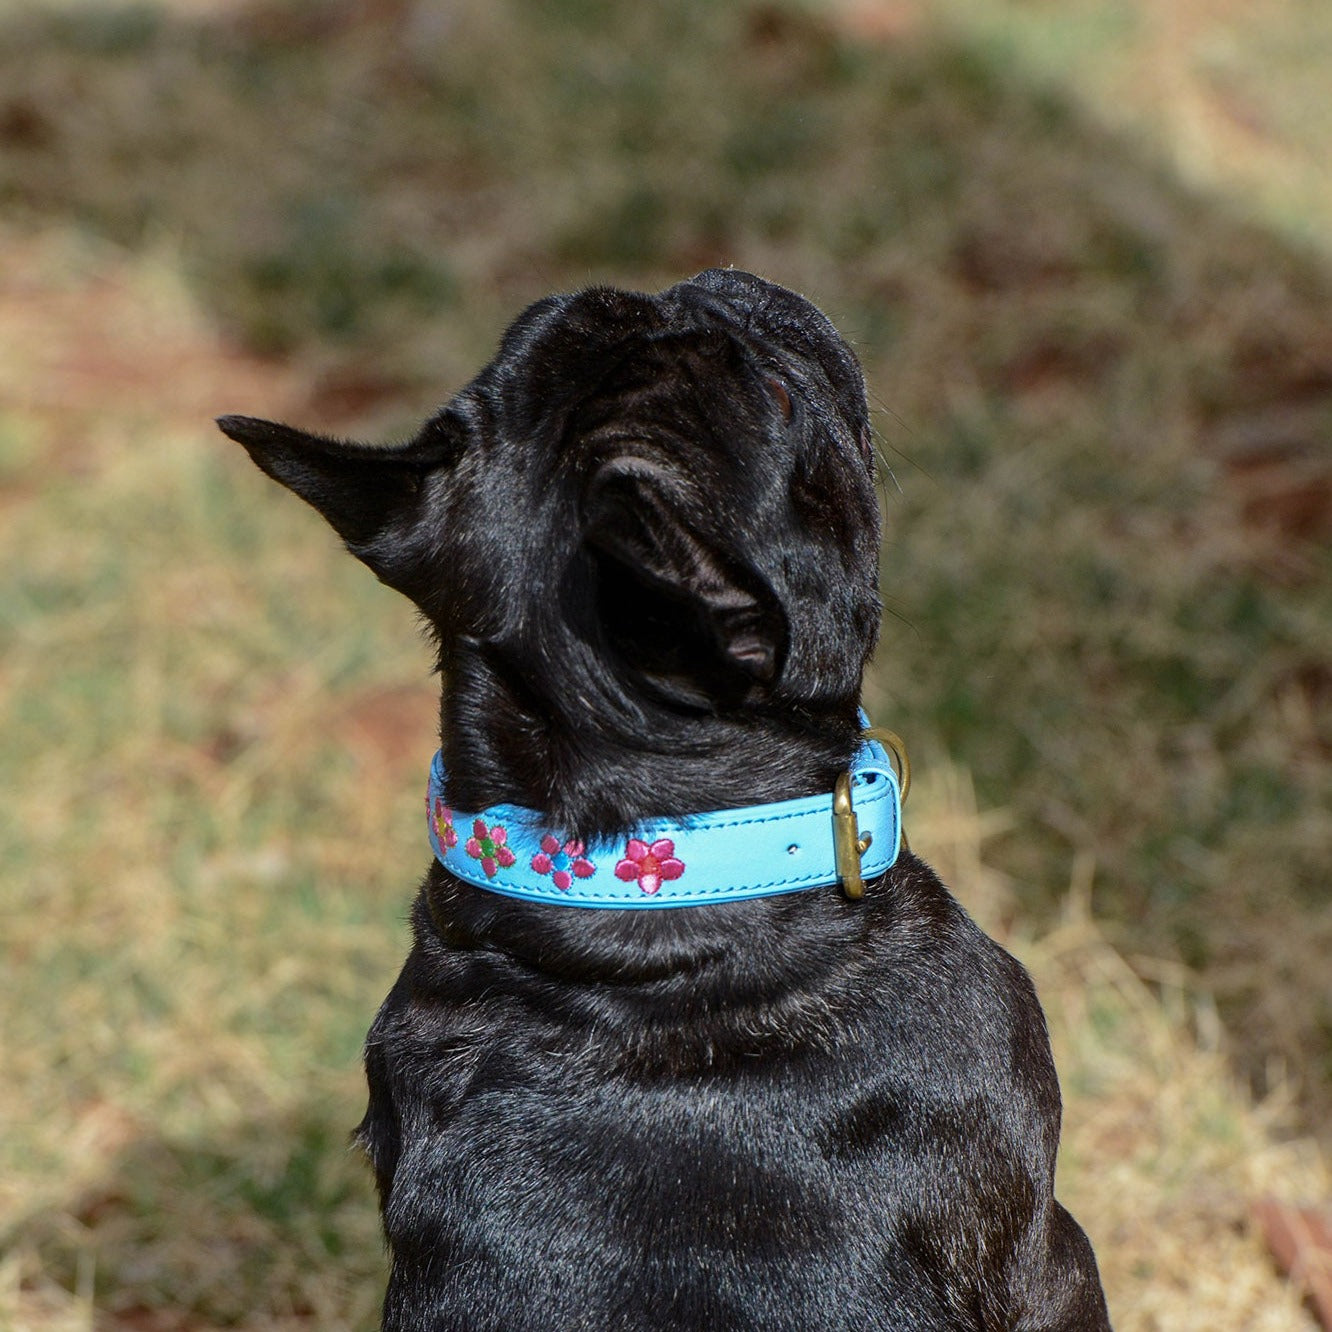 A black dog wearing a Georgie Paws Botanic Orchid Collar adorned with pink flowers and brass details sits attentively on the grass, gazing up at someone standing nearby out of frame.